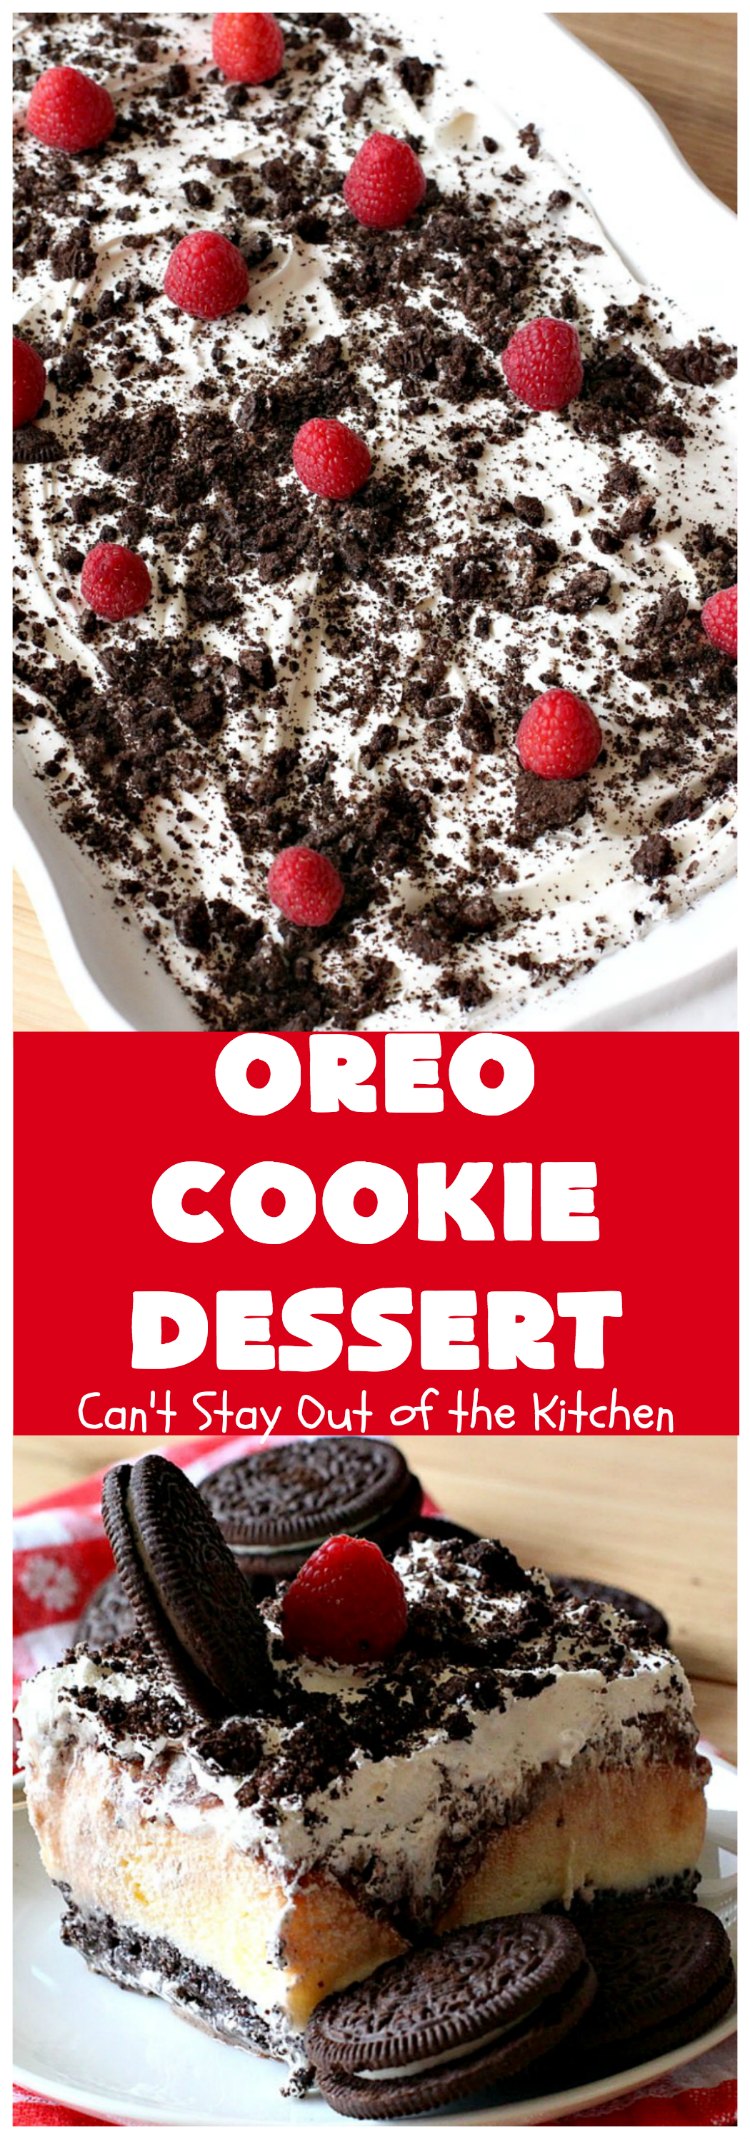 Oreo Cookie Dessert | Can't Stay Out of the Kitchen